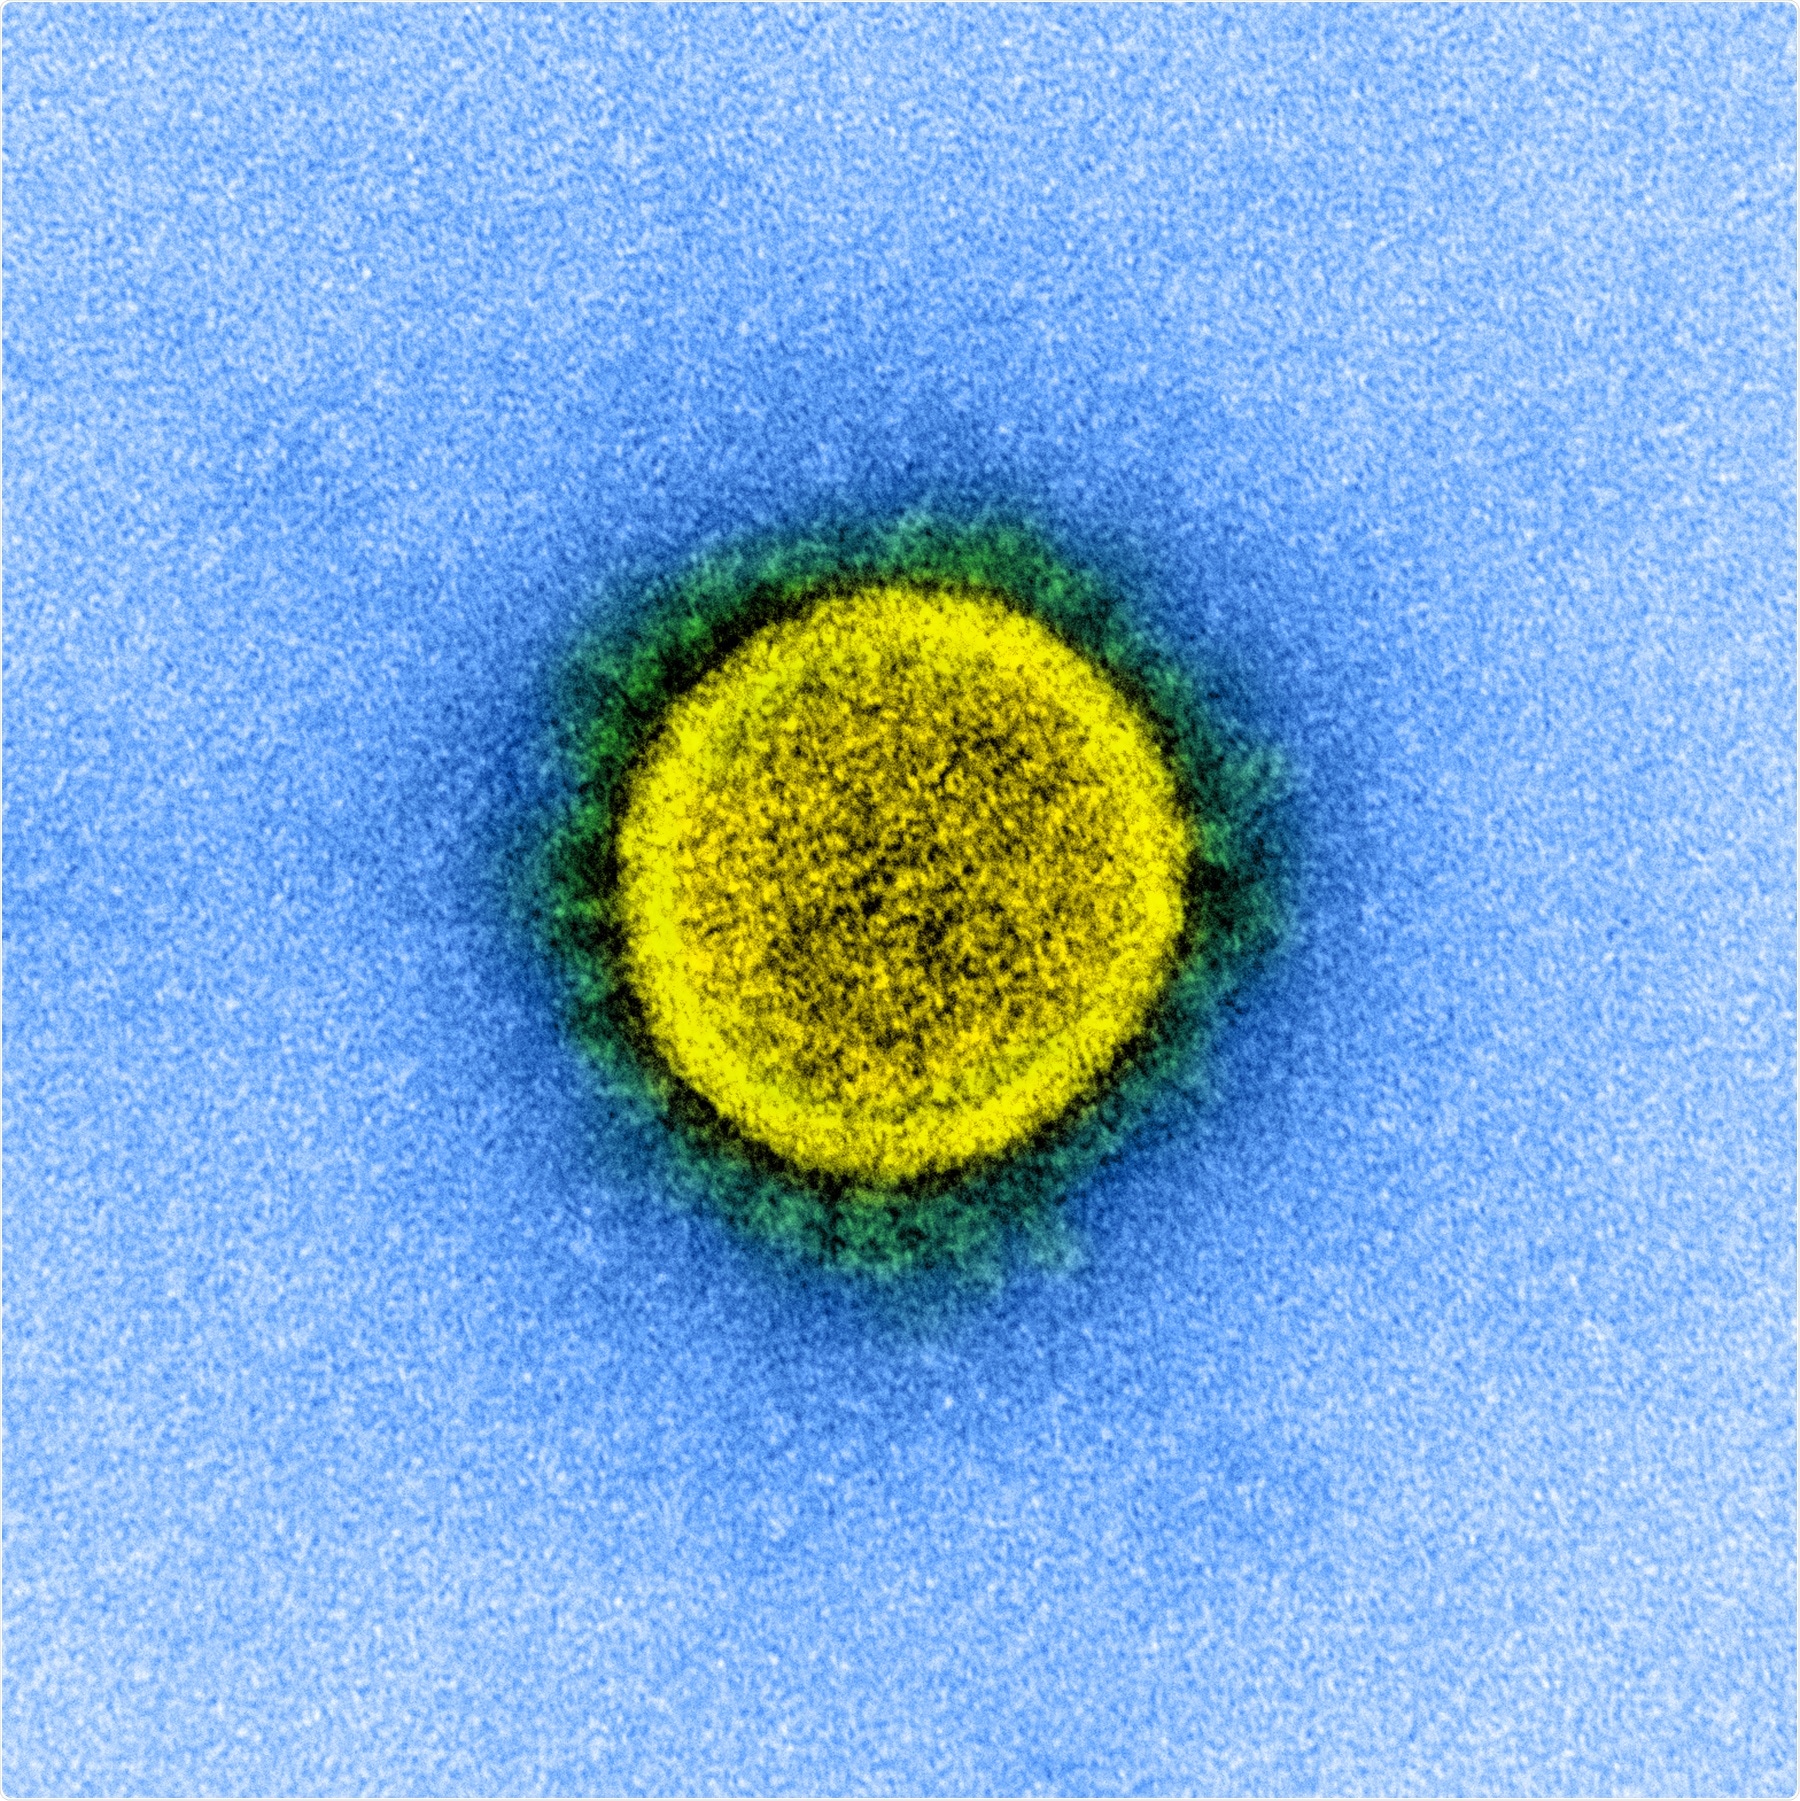 Transmission electron micrograph of a SARS-CoV-2 virus particle, isolated from a patient. Image captured and color-enhanced at the NIAID Integrated Research Facility (IRF) in Fort Detrick, Maryland. Credit: NIAID